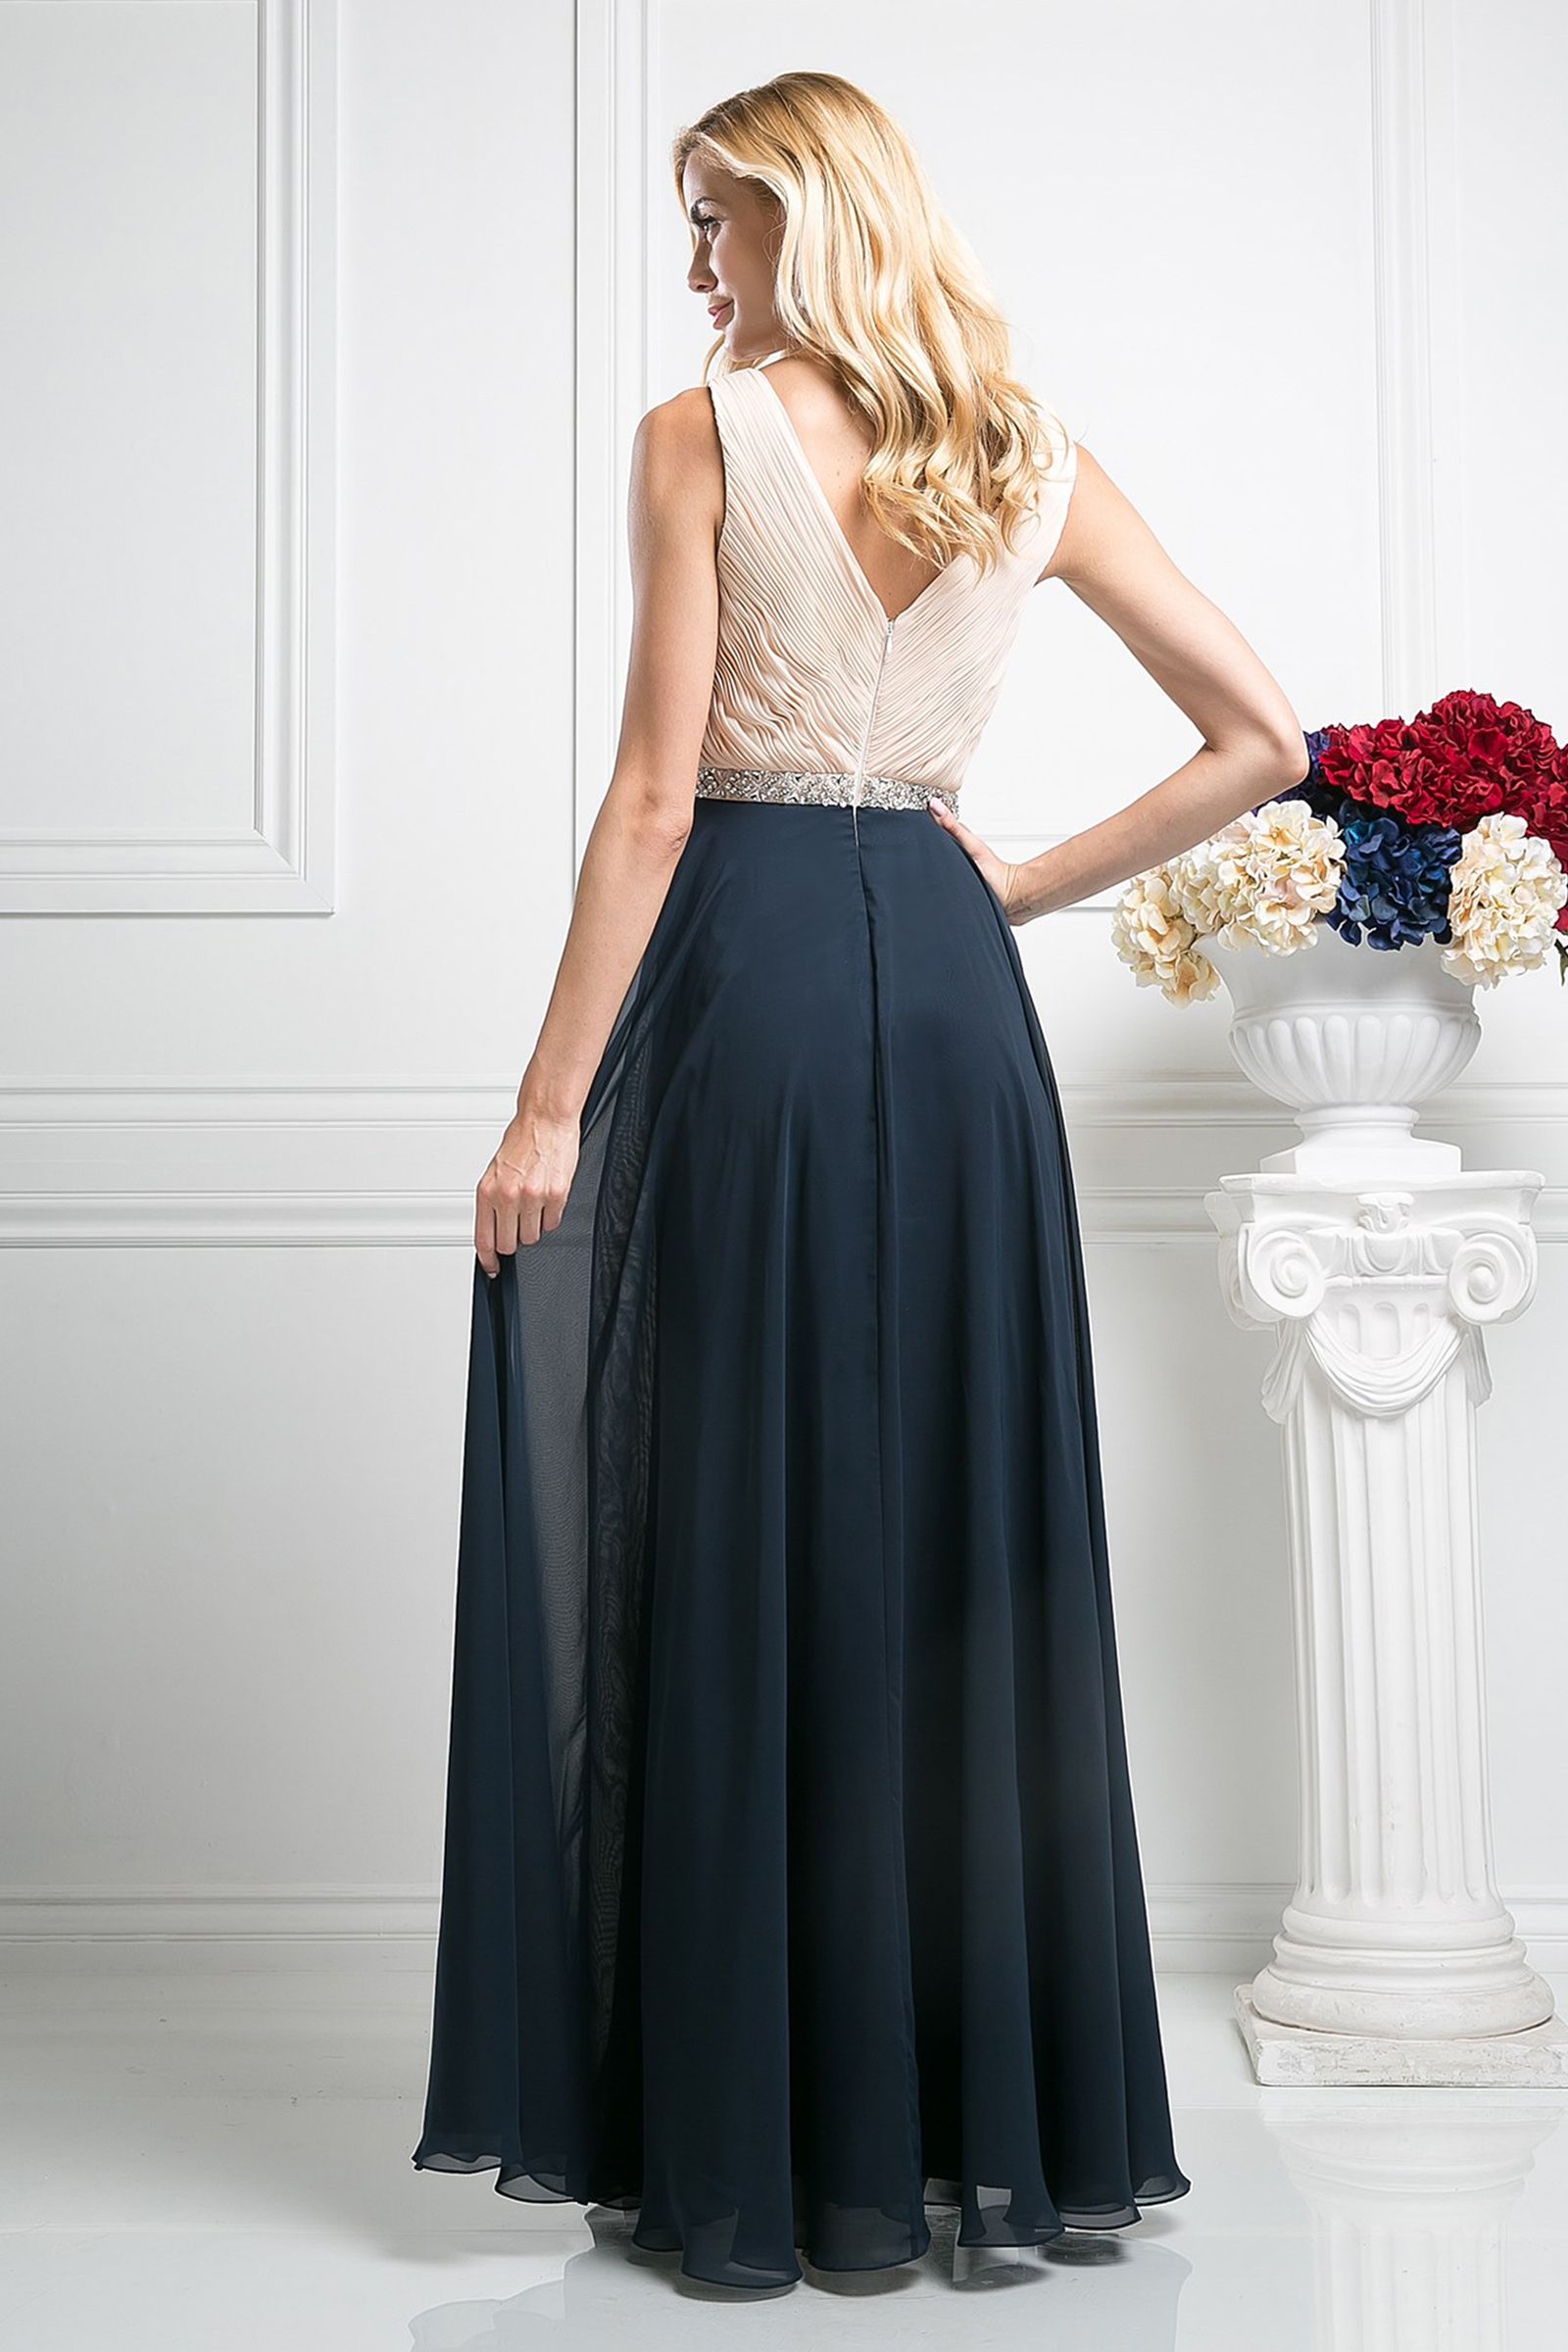 Ladivine 1968 A-Line Chiffon Evening Dress - An elegant gown featuring a pleated V-neck bodice and beaded belt, perfect for evening events.